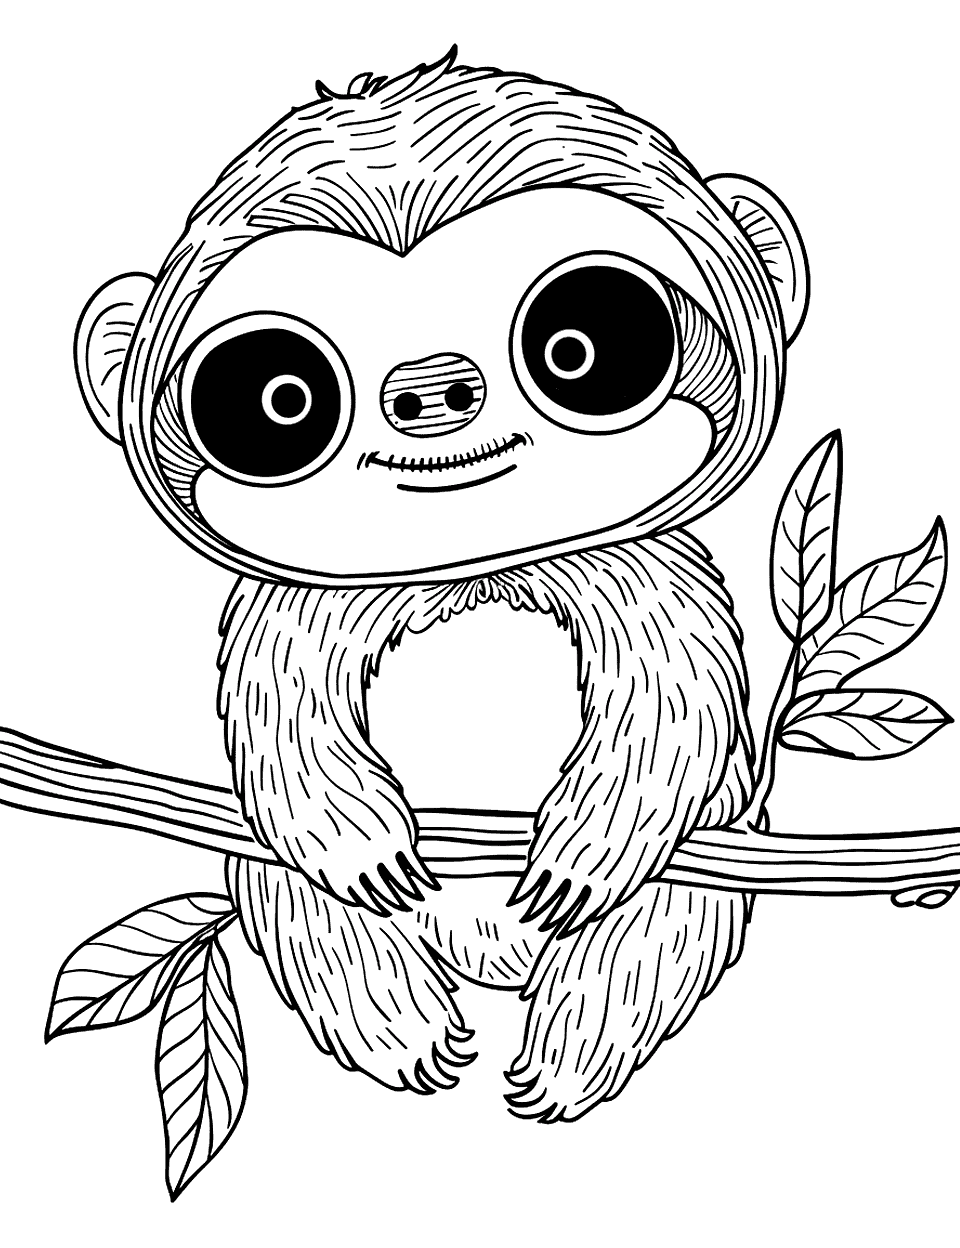 Kawaii Style Sloth with Big Eyes Coloring Page - A charmingly cute sloth with exaggerated big eyes and a small nose on a branch.